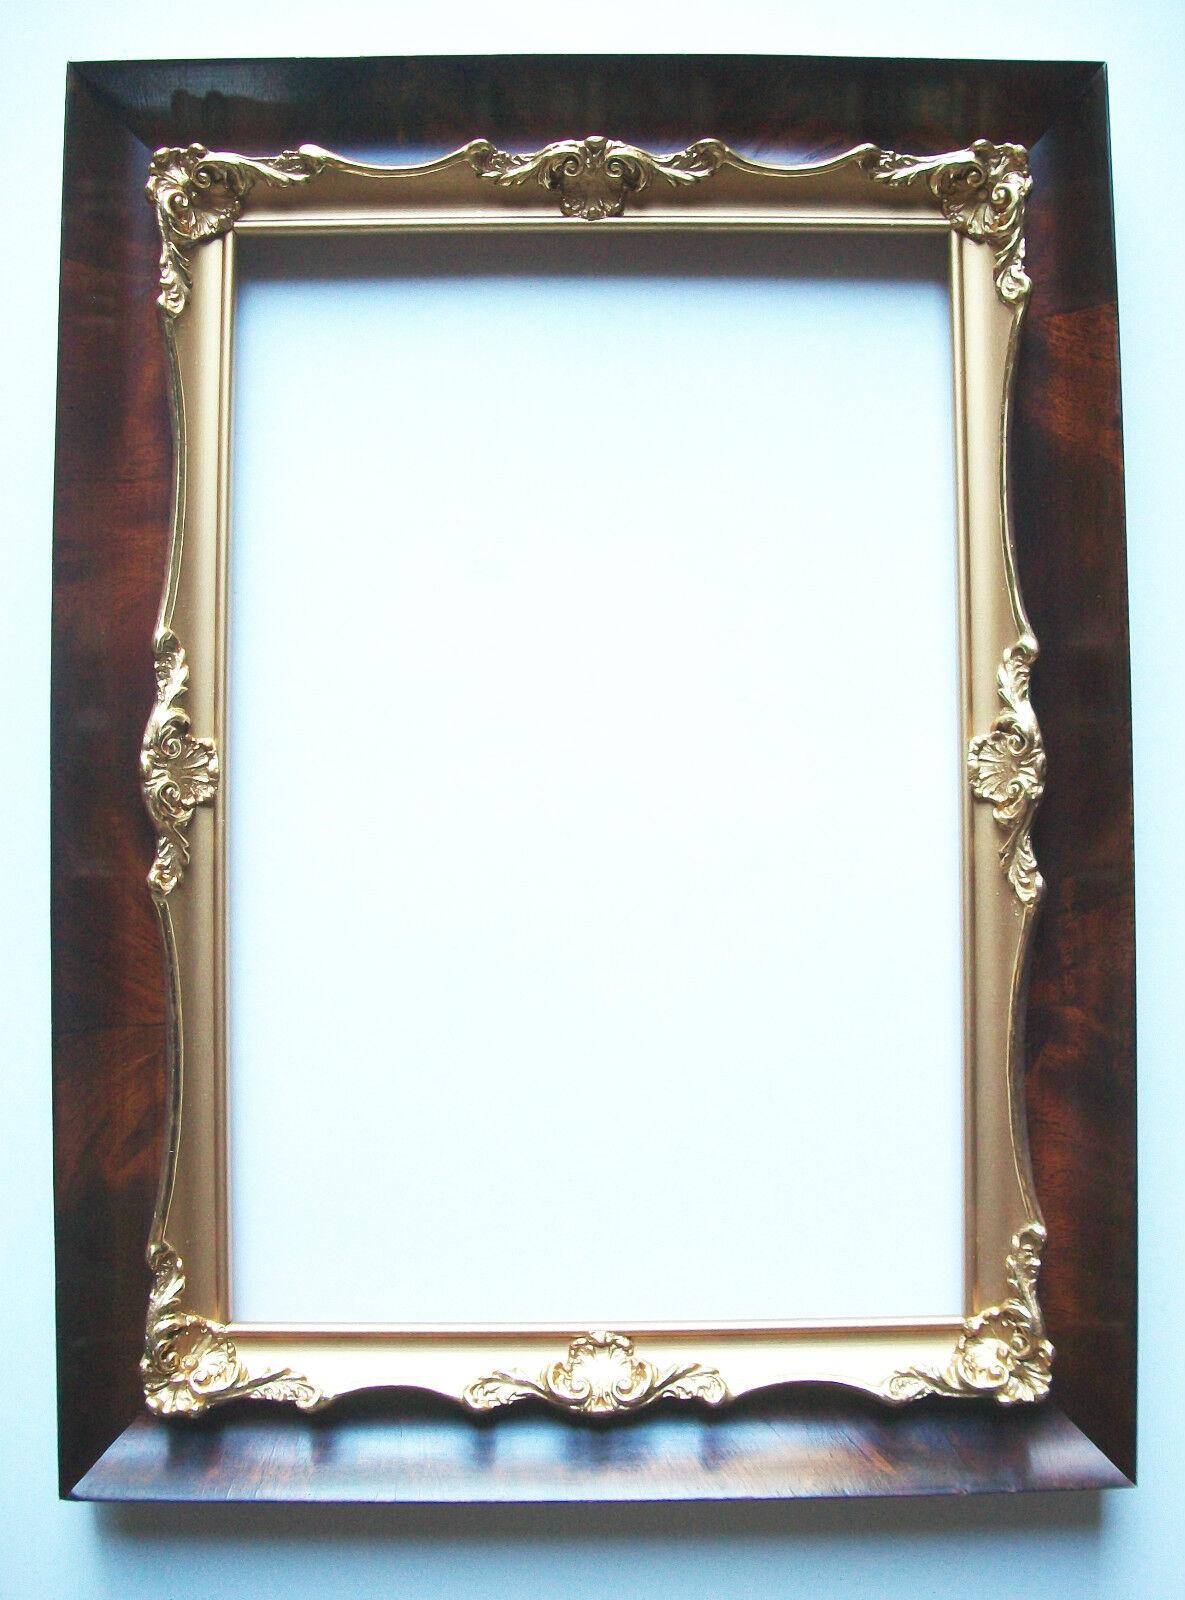 Hand-Crafted Antique Louis XVI Style Gilt Picture Frame, Early 20th Century